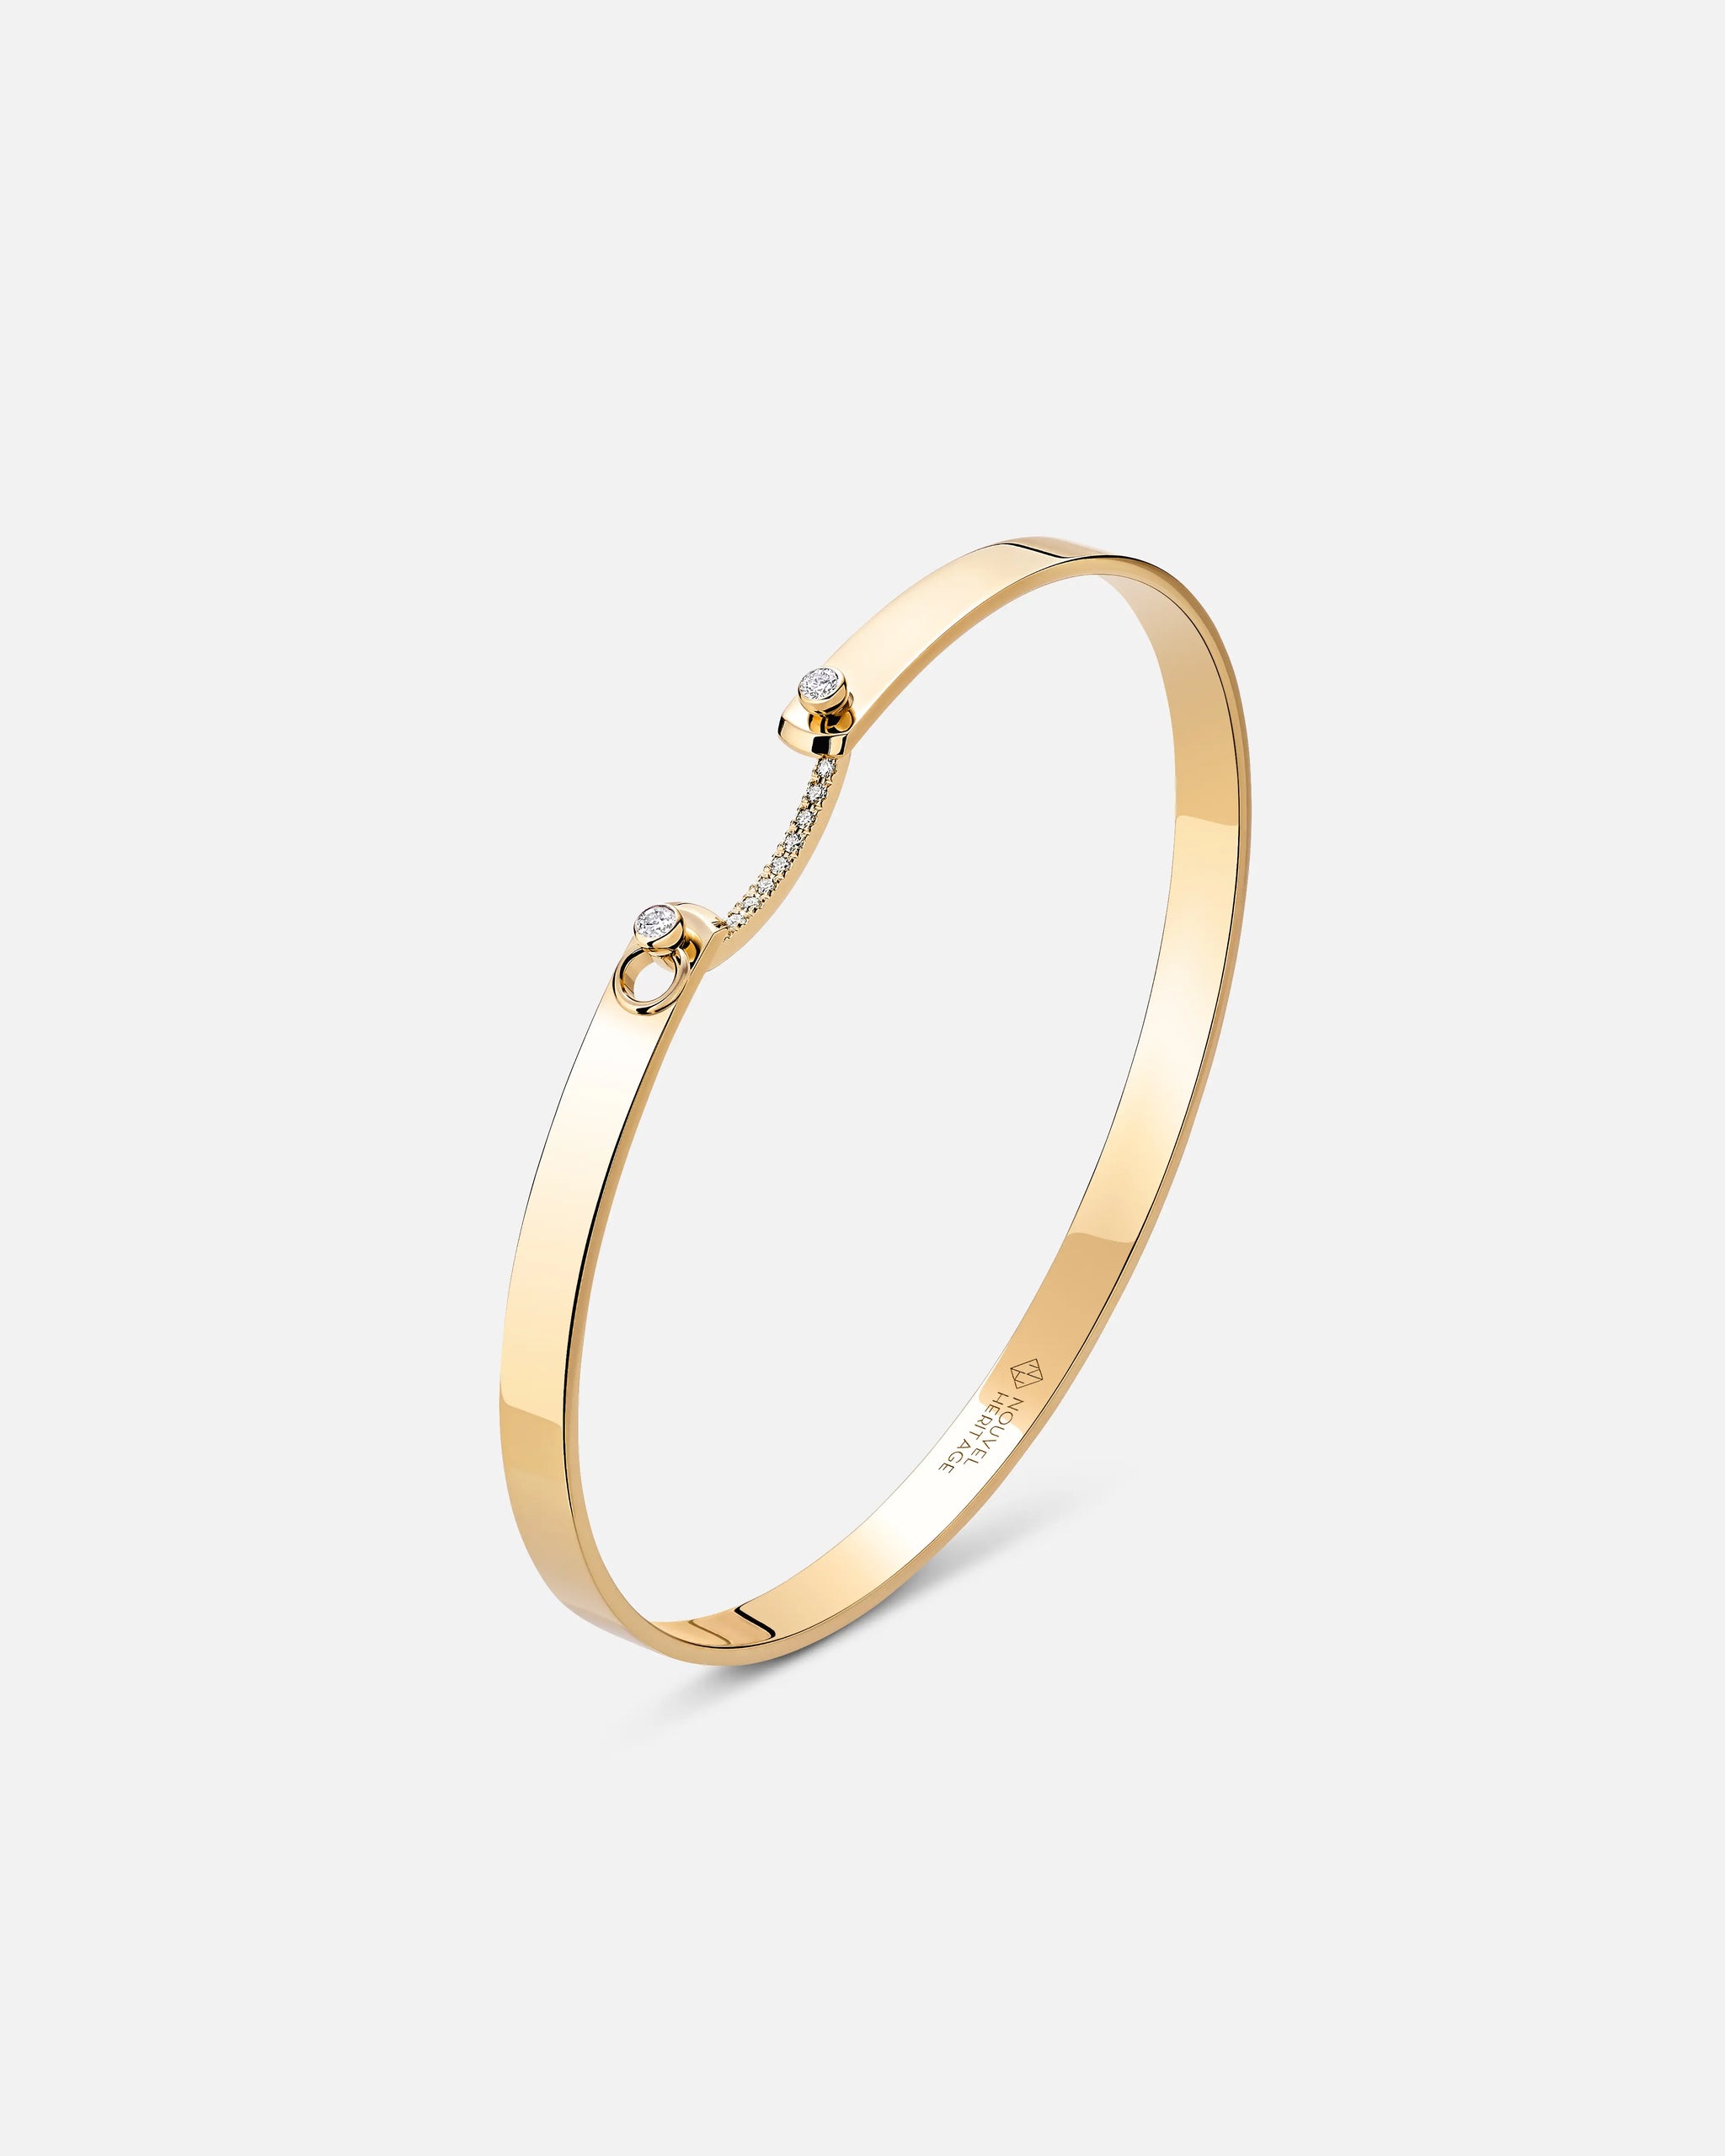 Business Meeting Mood Bangle in Yellow Gold - 1 - Nouvel Heritage